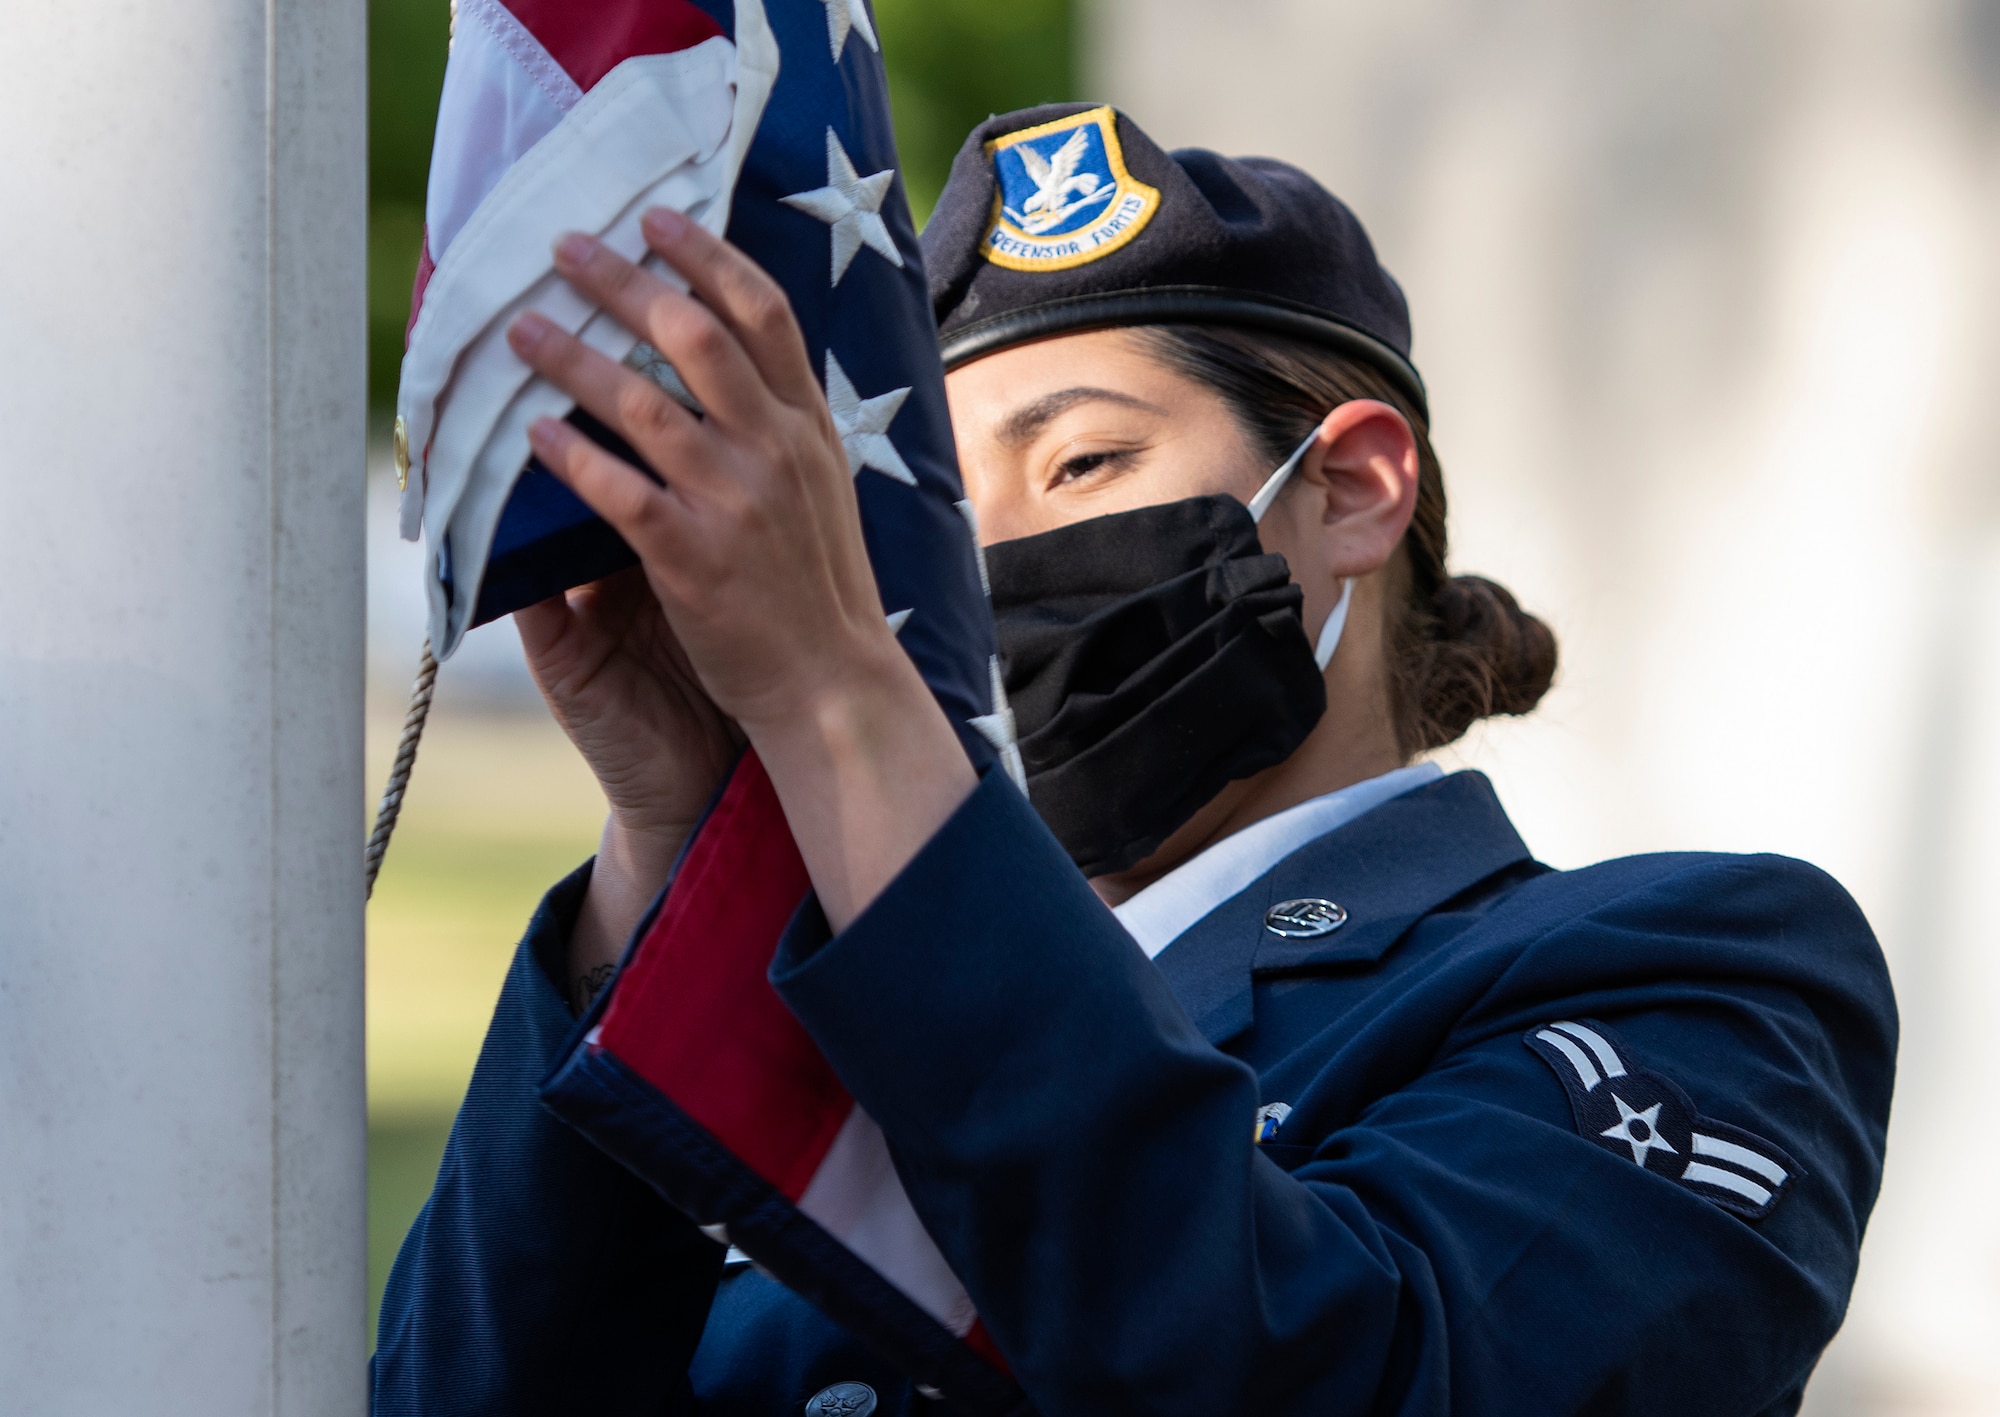 Airman 1st Class Gabbie Reyes, 100th Security Forces Squadron, begins to raise the U.S. flag during the opening ceremony to commemorate the start of National Police Week at RAF Lakenheath, England, May 11, 2020. Established by a joint resolution of Congress in 1962, National Police Week pays special recognition to those law enforcement officers who’ve lost their lives in the line of duty for the safety and protection of others. (U.S. Air Force photo by Airman 1st Class Jessi Monte)